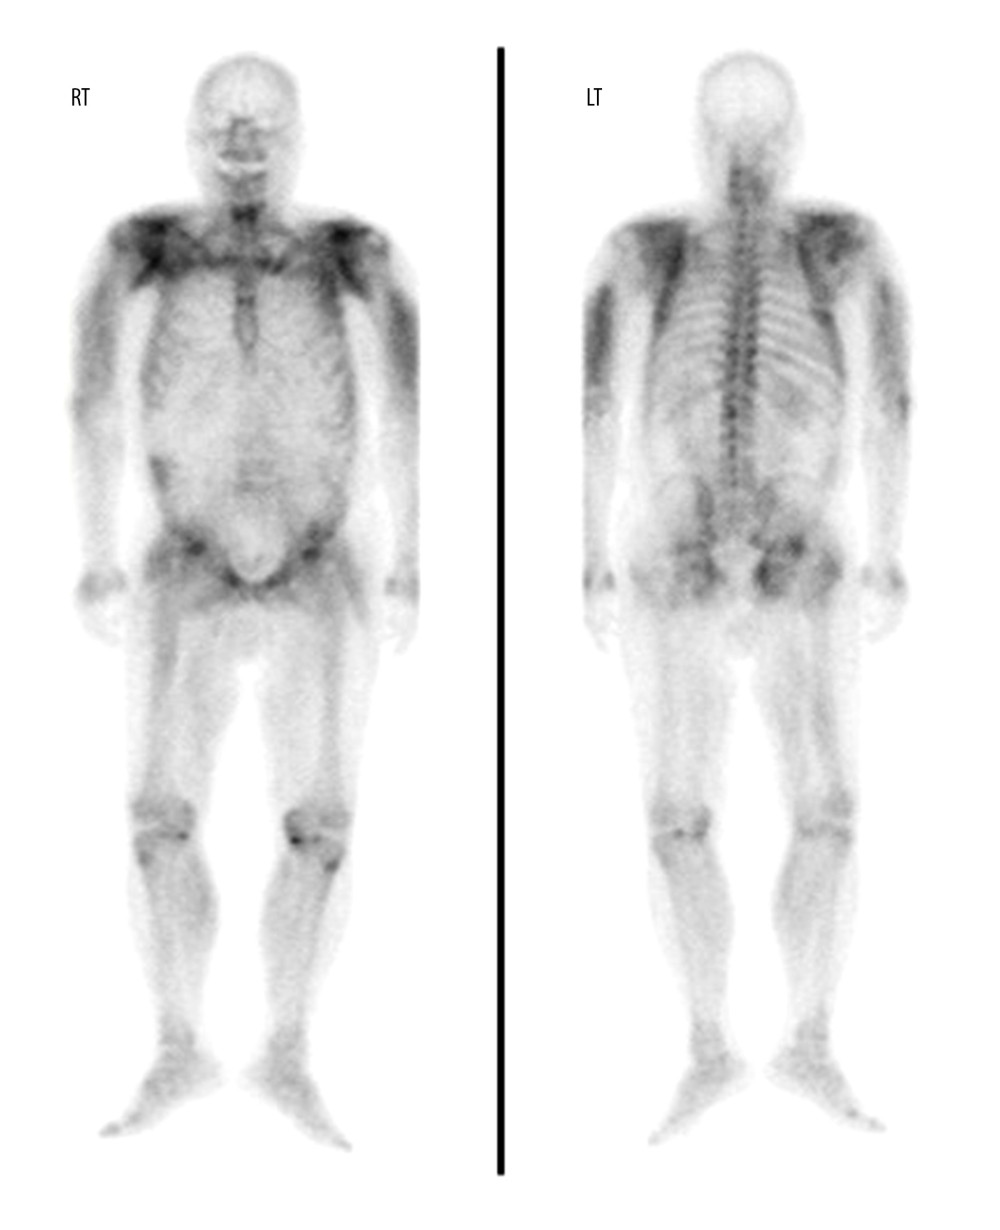 Technetium-99m hydroxymethylene diphosphonate (99mTc-HDP) bone scintigraphy on hospitalization day 10 revealed increased soft tissue uptake of radiotracer in both shoulders, upper arms, and gluteal areas. RT – right; LT – left.